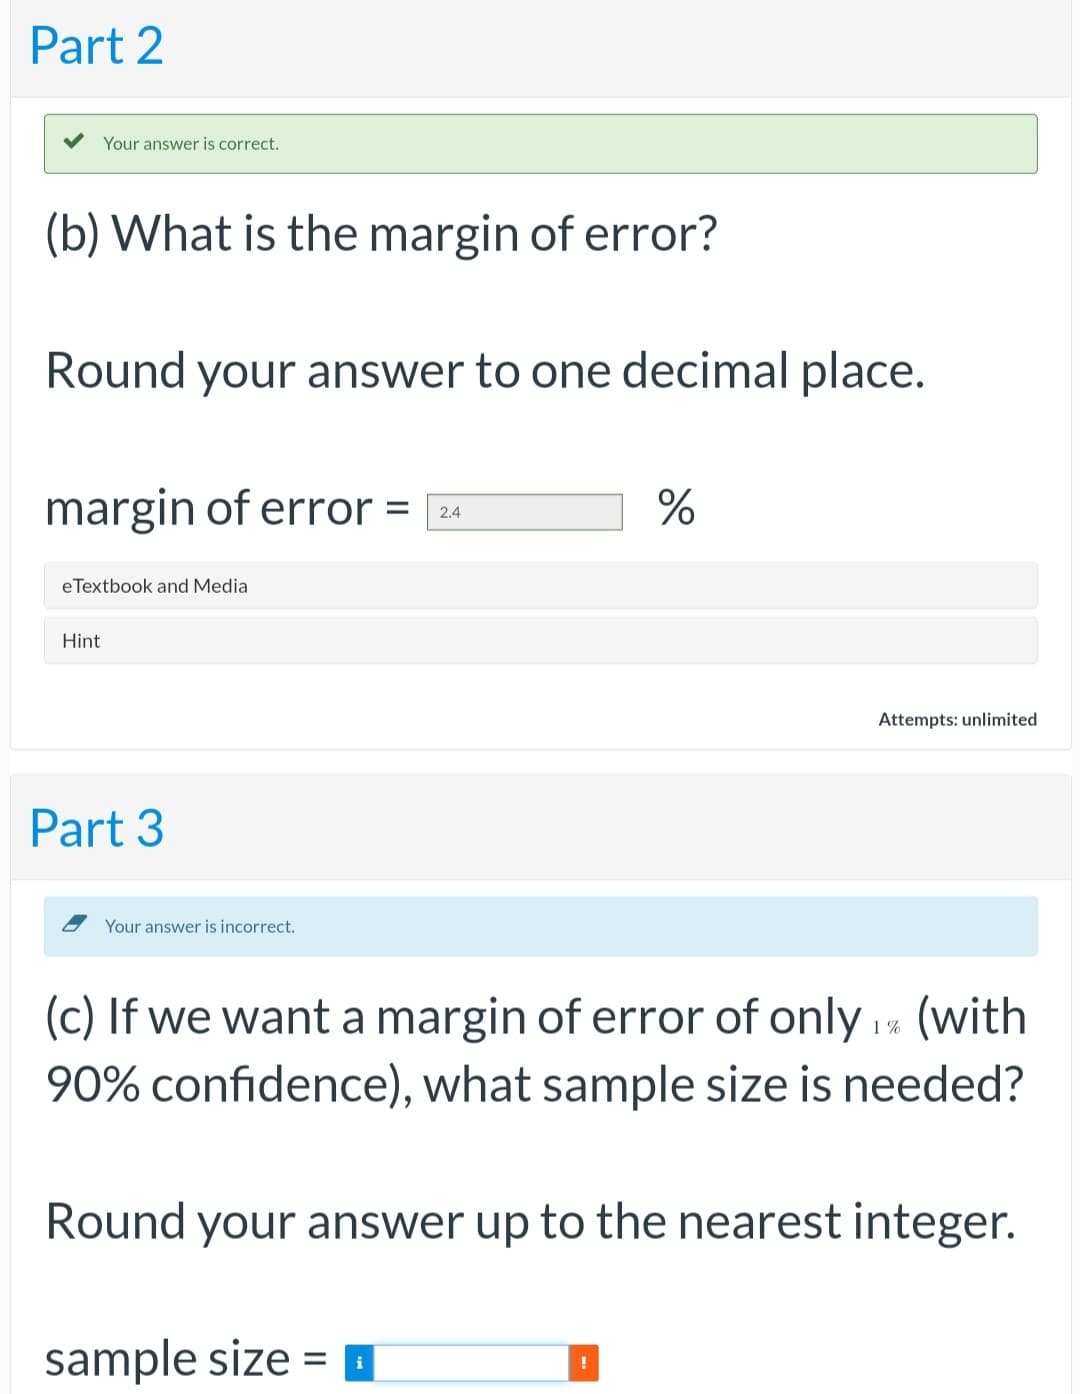 Part 2
Your answer is correct.
(b) What is the margin of error?
Round your answer to one decimal place.
margin of error = 24
eTextbook and Media
Hint
Part 3
Your answer is incorrect.
(c) If we want a margin of error of only 1% (with
90% confidence), what sample size is needed?
sample size =
%
Round your answer up to the nearest integer.
i
Attempts: unlimited
!